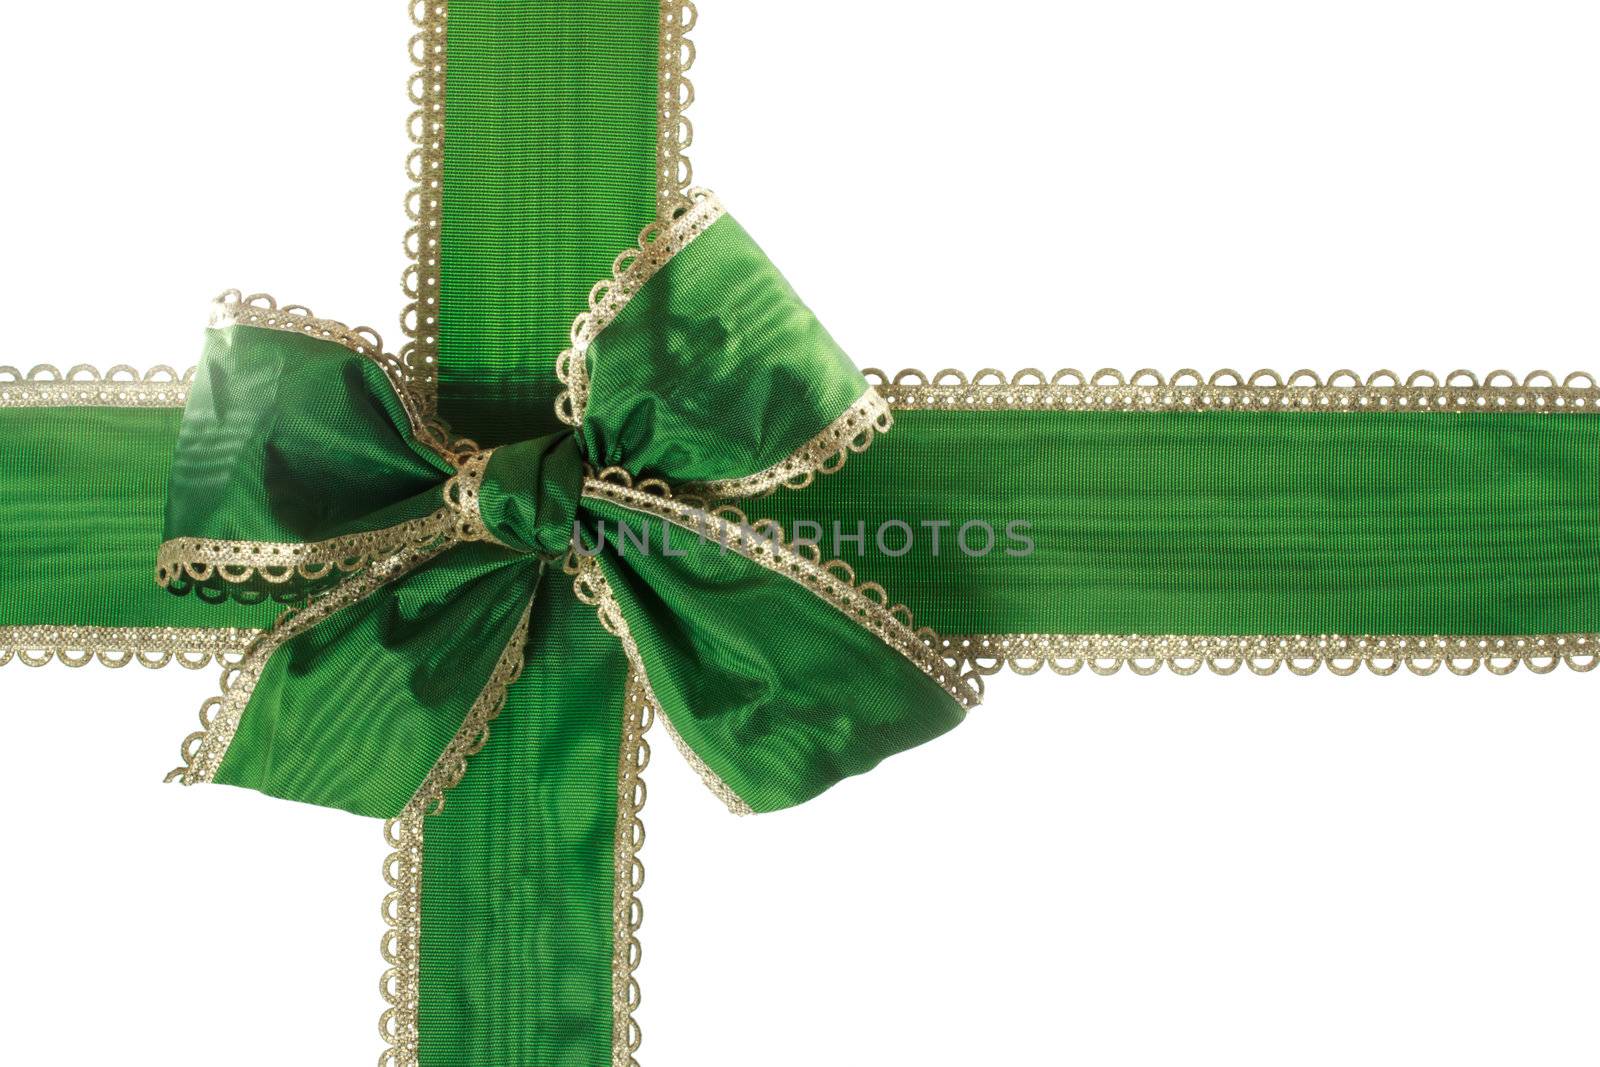 Green Bow and Ribbon by melpomene